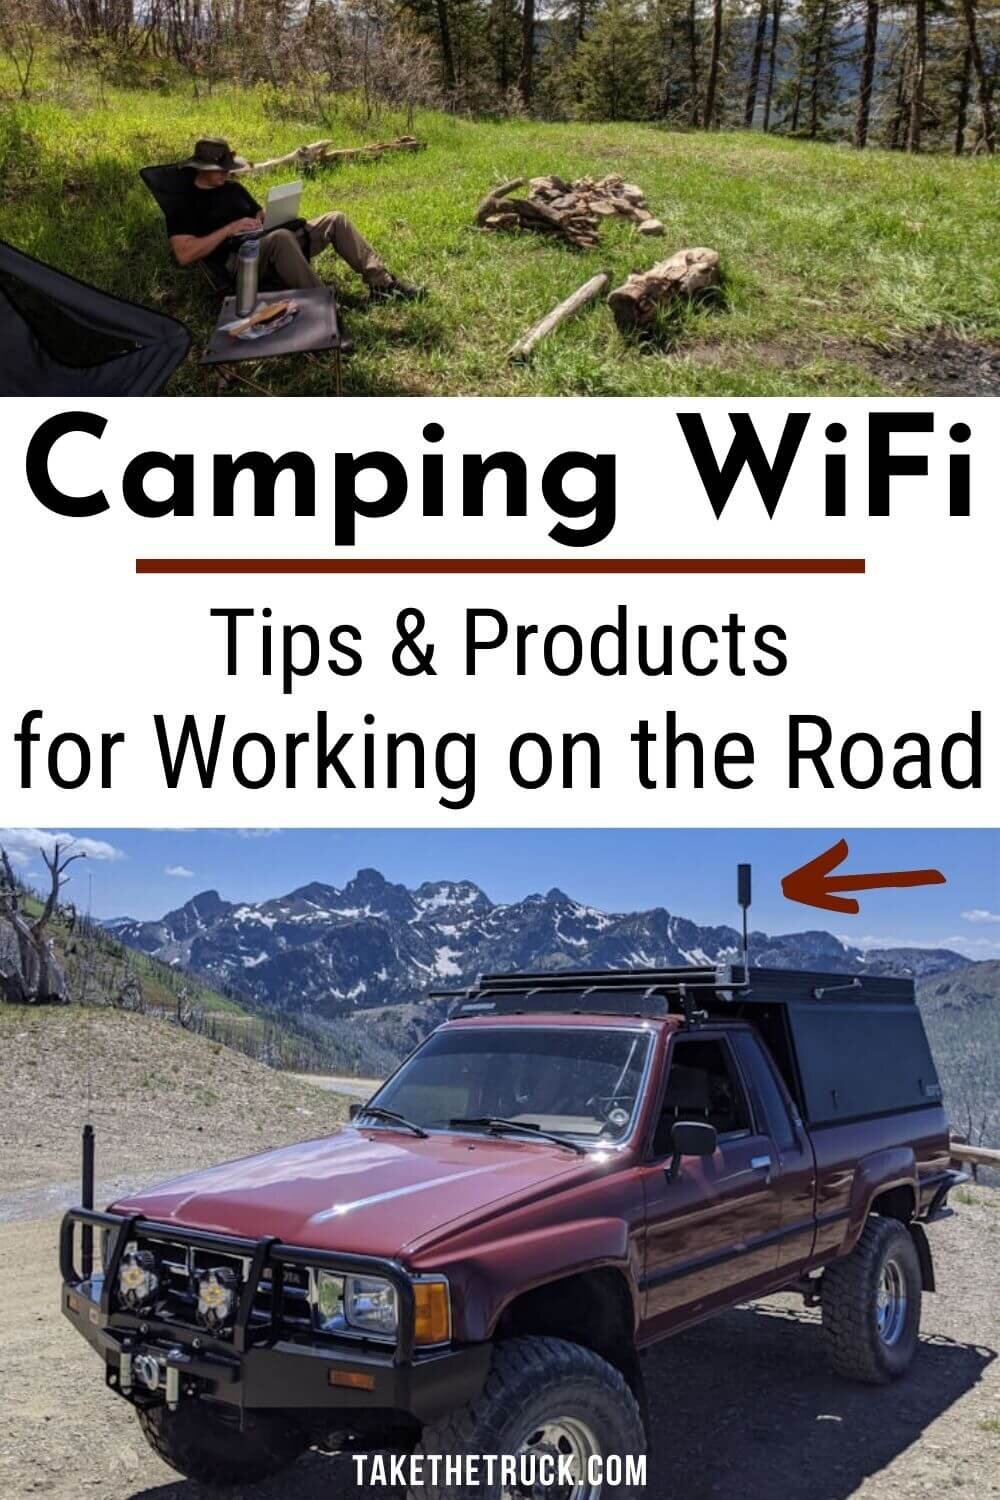 Check this out if you need wifi while camping! We’ve finally found a portable camping wifi antenne and cell signal booster that helps provide wifi while traveling, camping, or RVing!